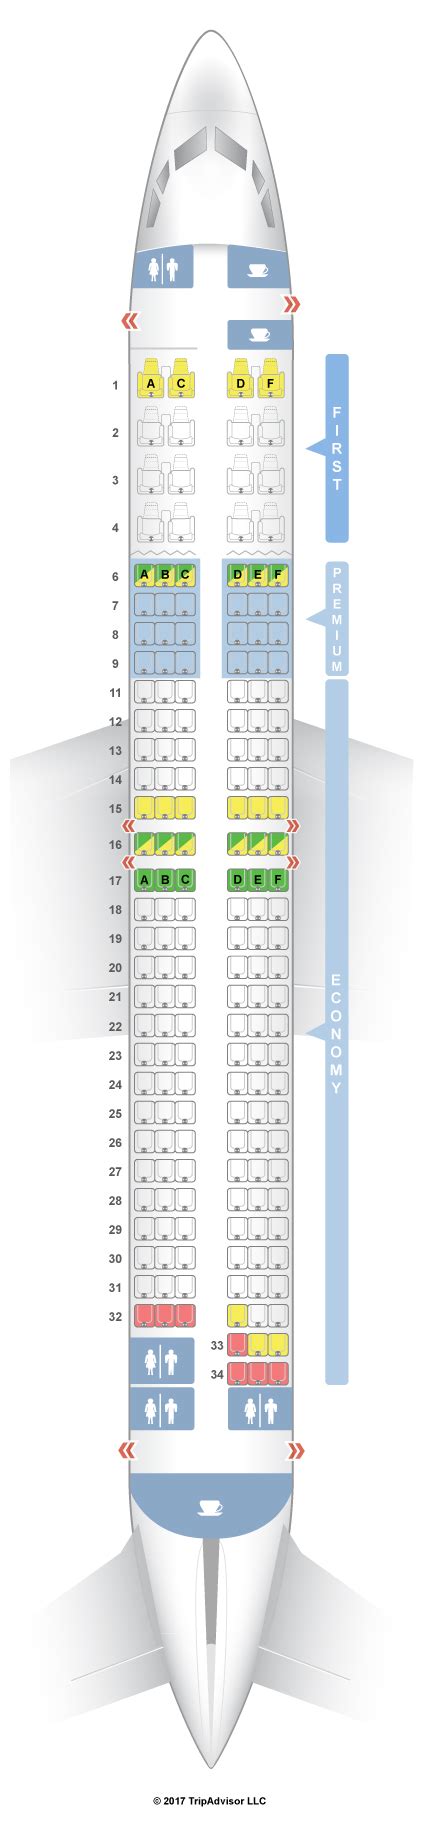 I am a big guy and stuck in an exit row seat on Alaska 737-900 in 17F. Can anyone confirm if the right side armrest on that seat would move up and if the left side armrest has the tray table in it. Unable to change to aisle as all seats are taken. ... Alaska 737-900 - Exit row 17F - SeatGuru Forum. Tripadvisor Forums ;. 